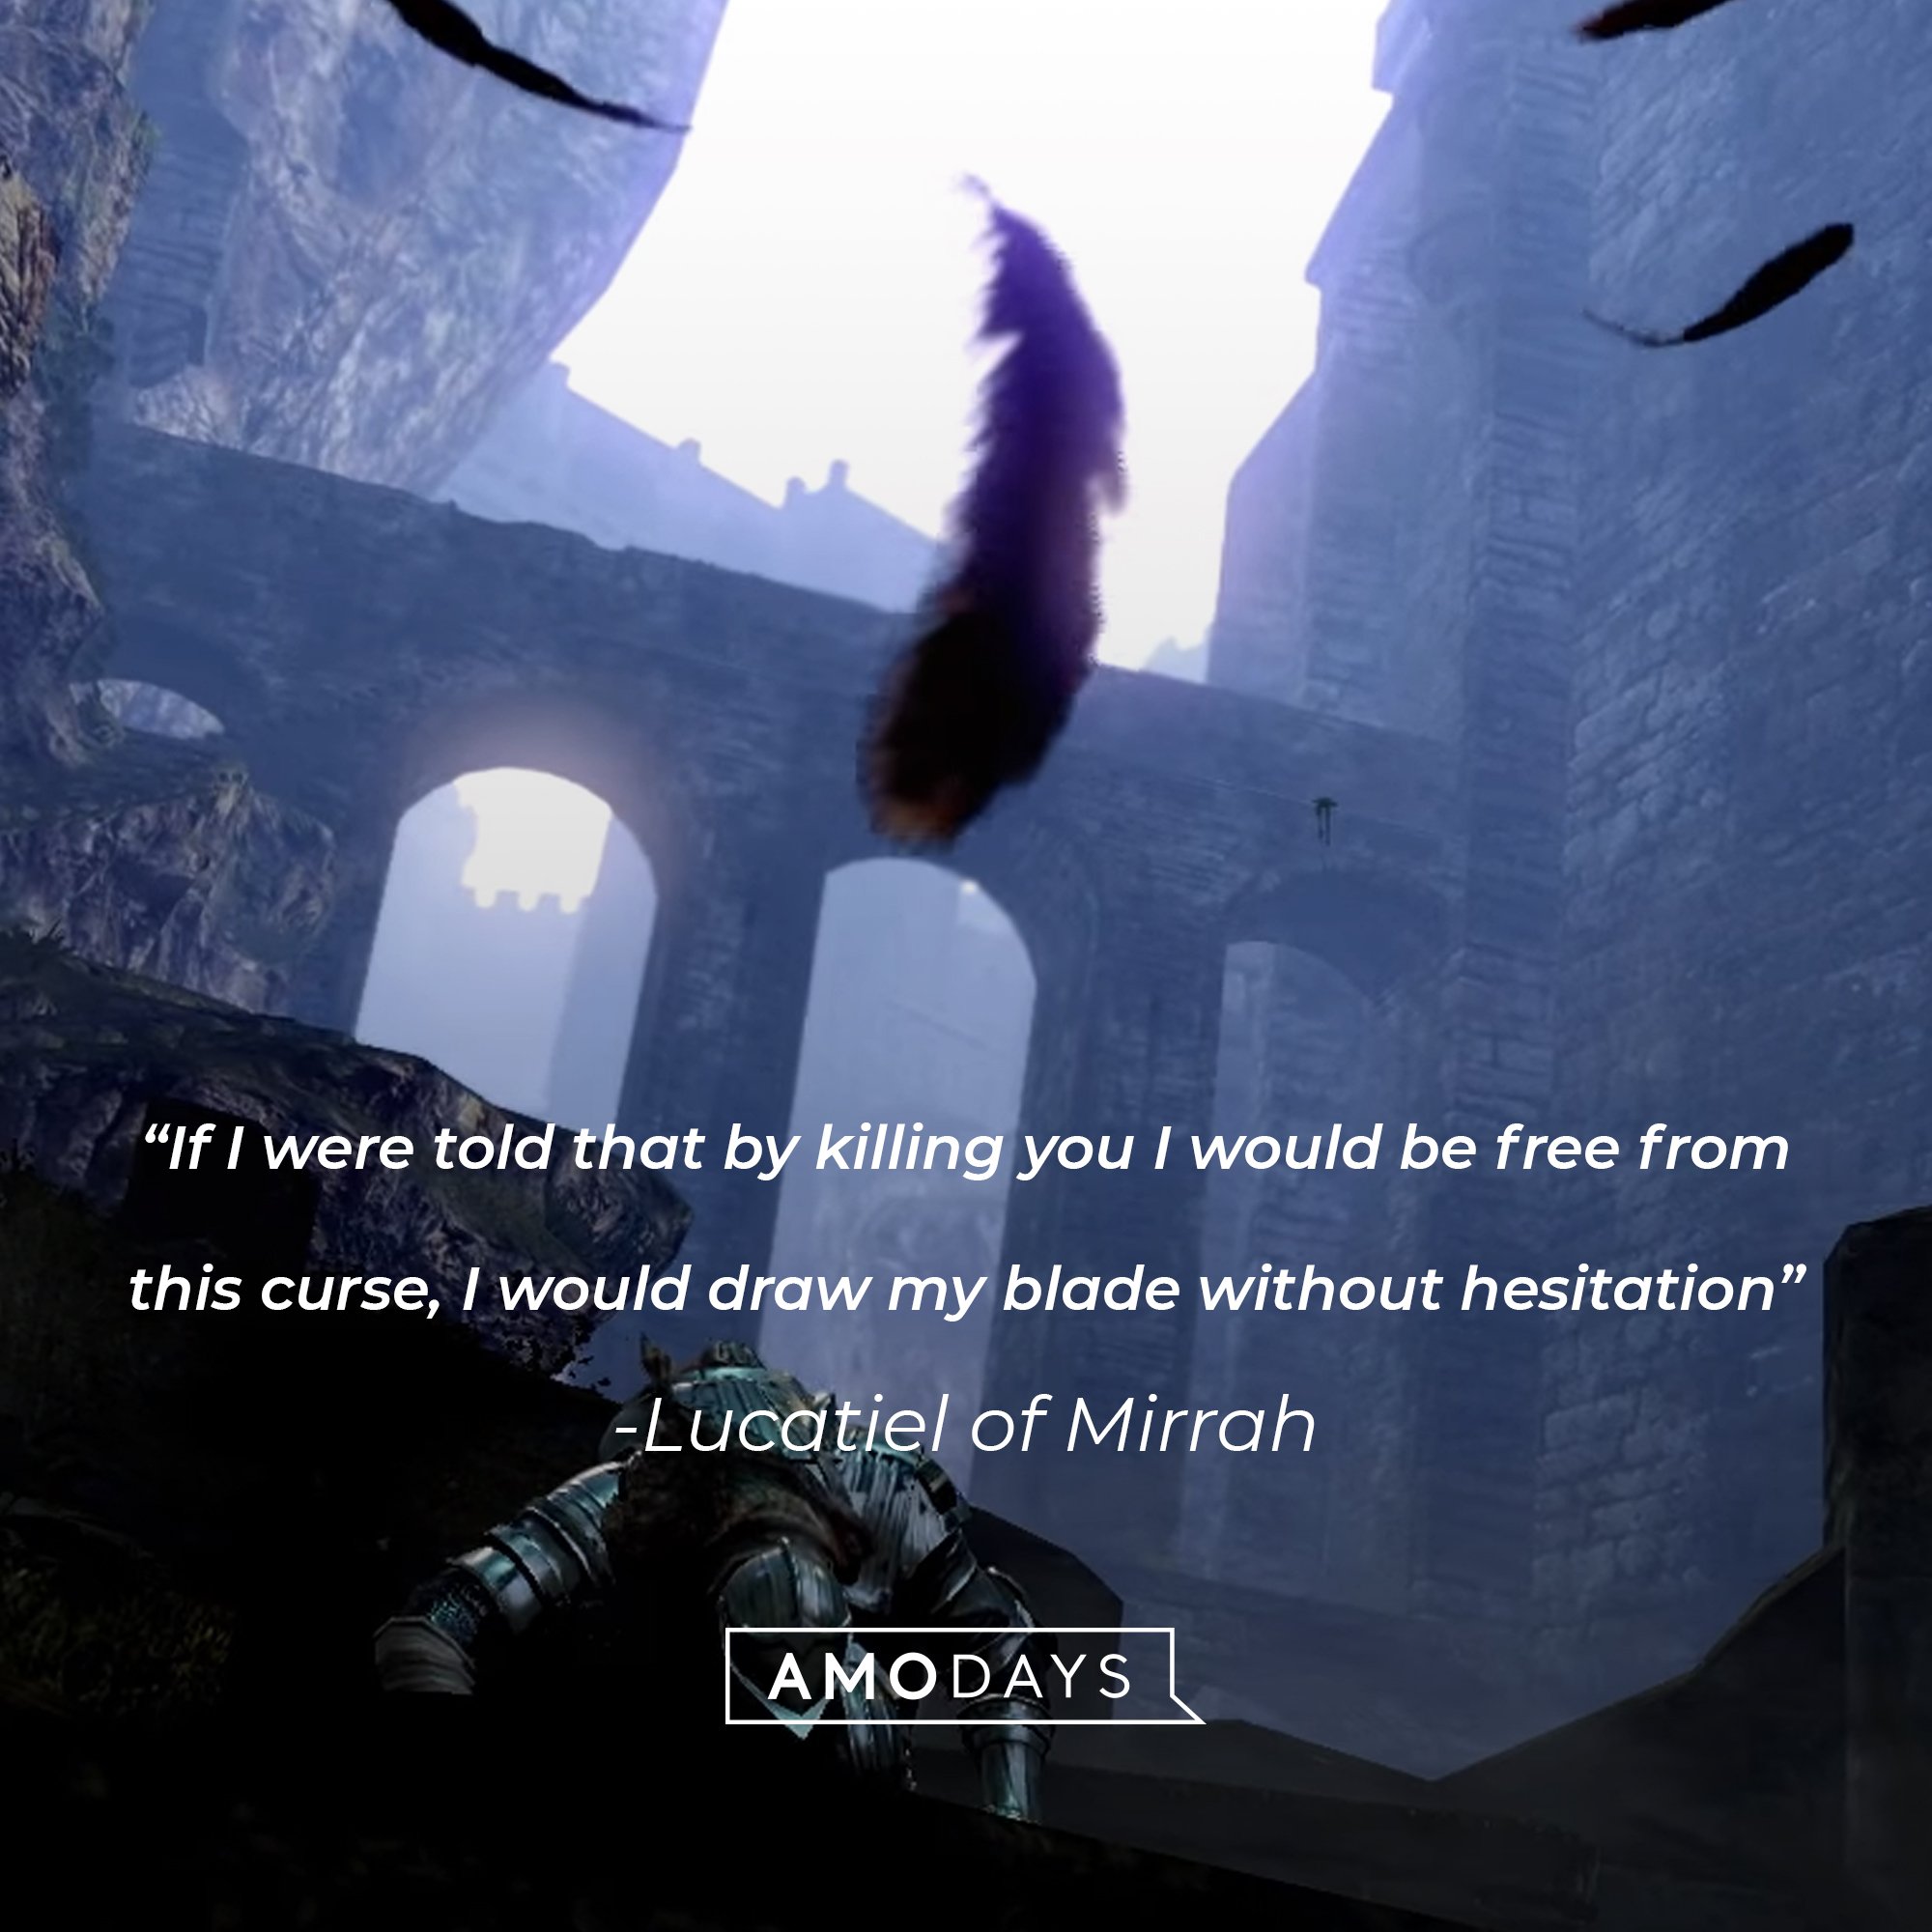 Lucatiel of Mirrah’s quote: "If I were told that by killing you I would be free from this curse, I would draw my blade without hesitation." | Image: AmoDays